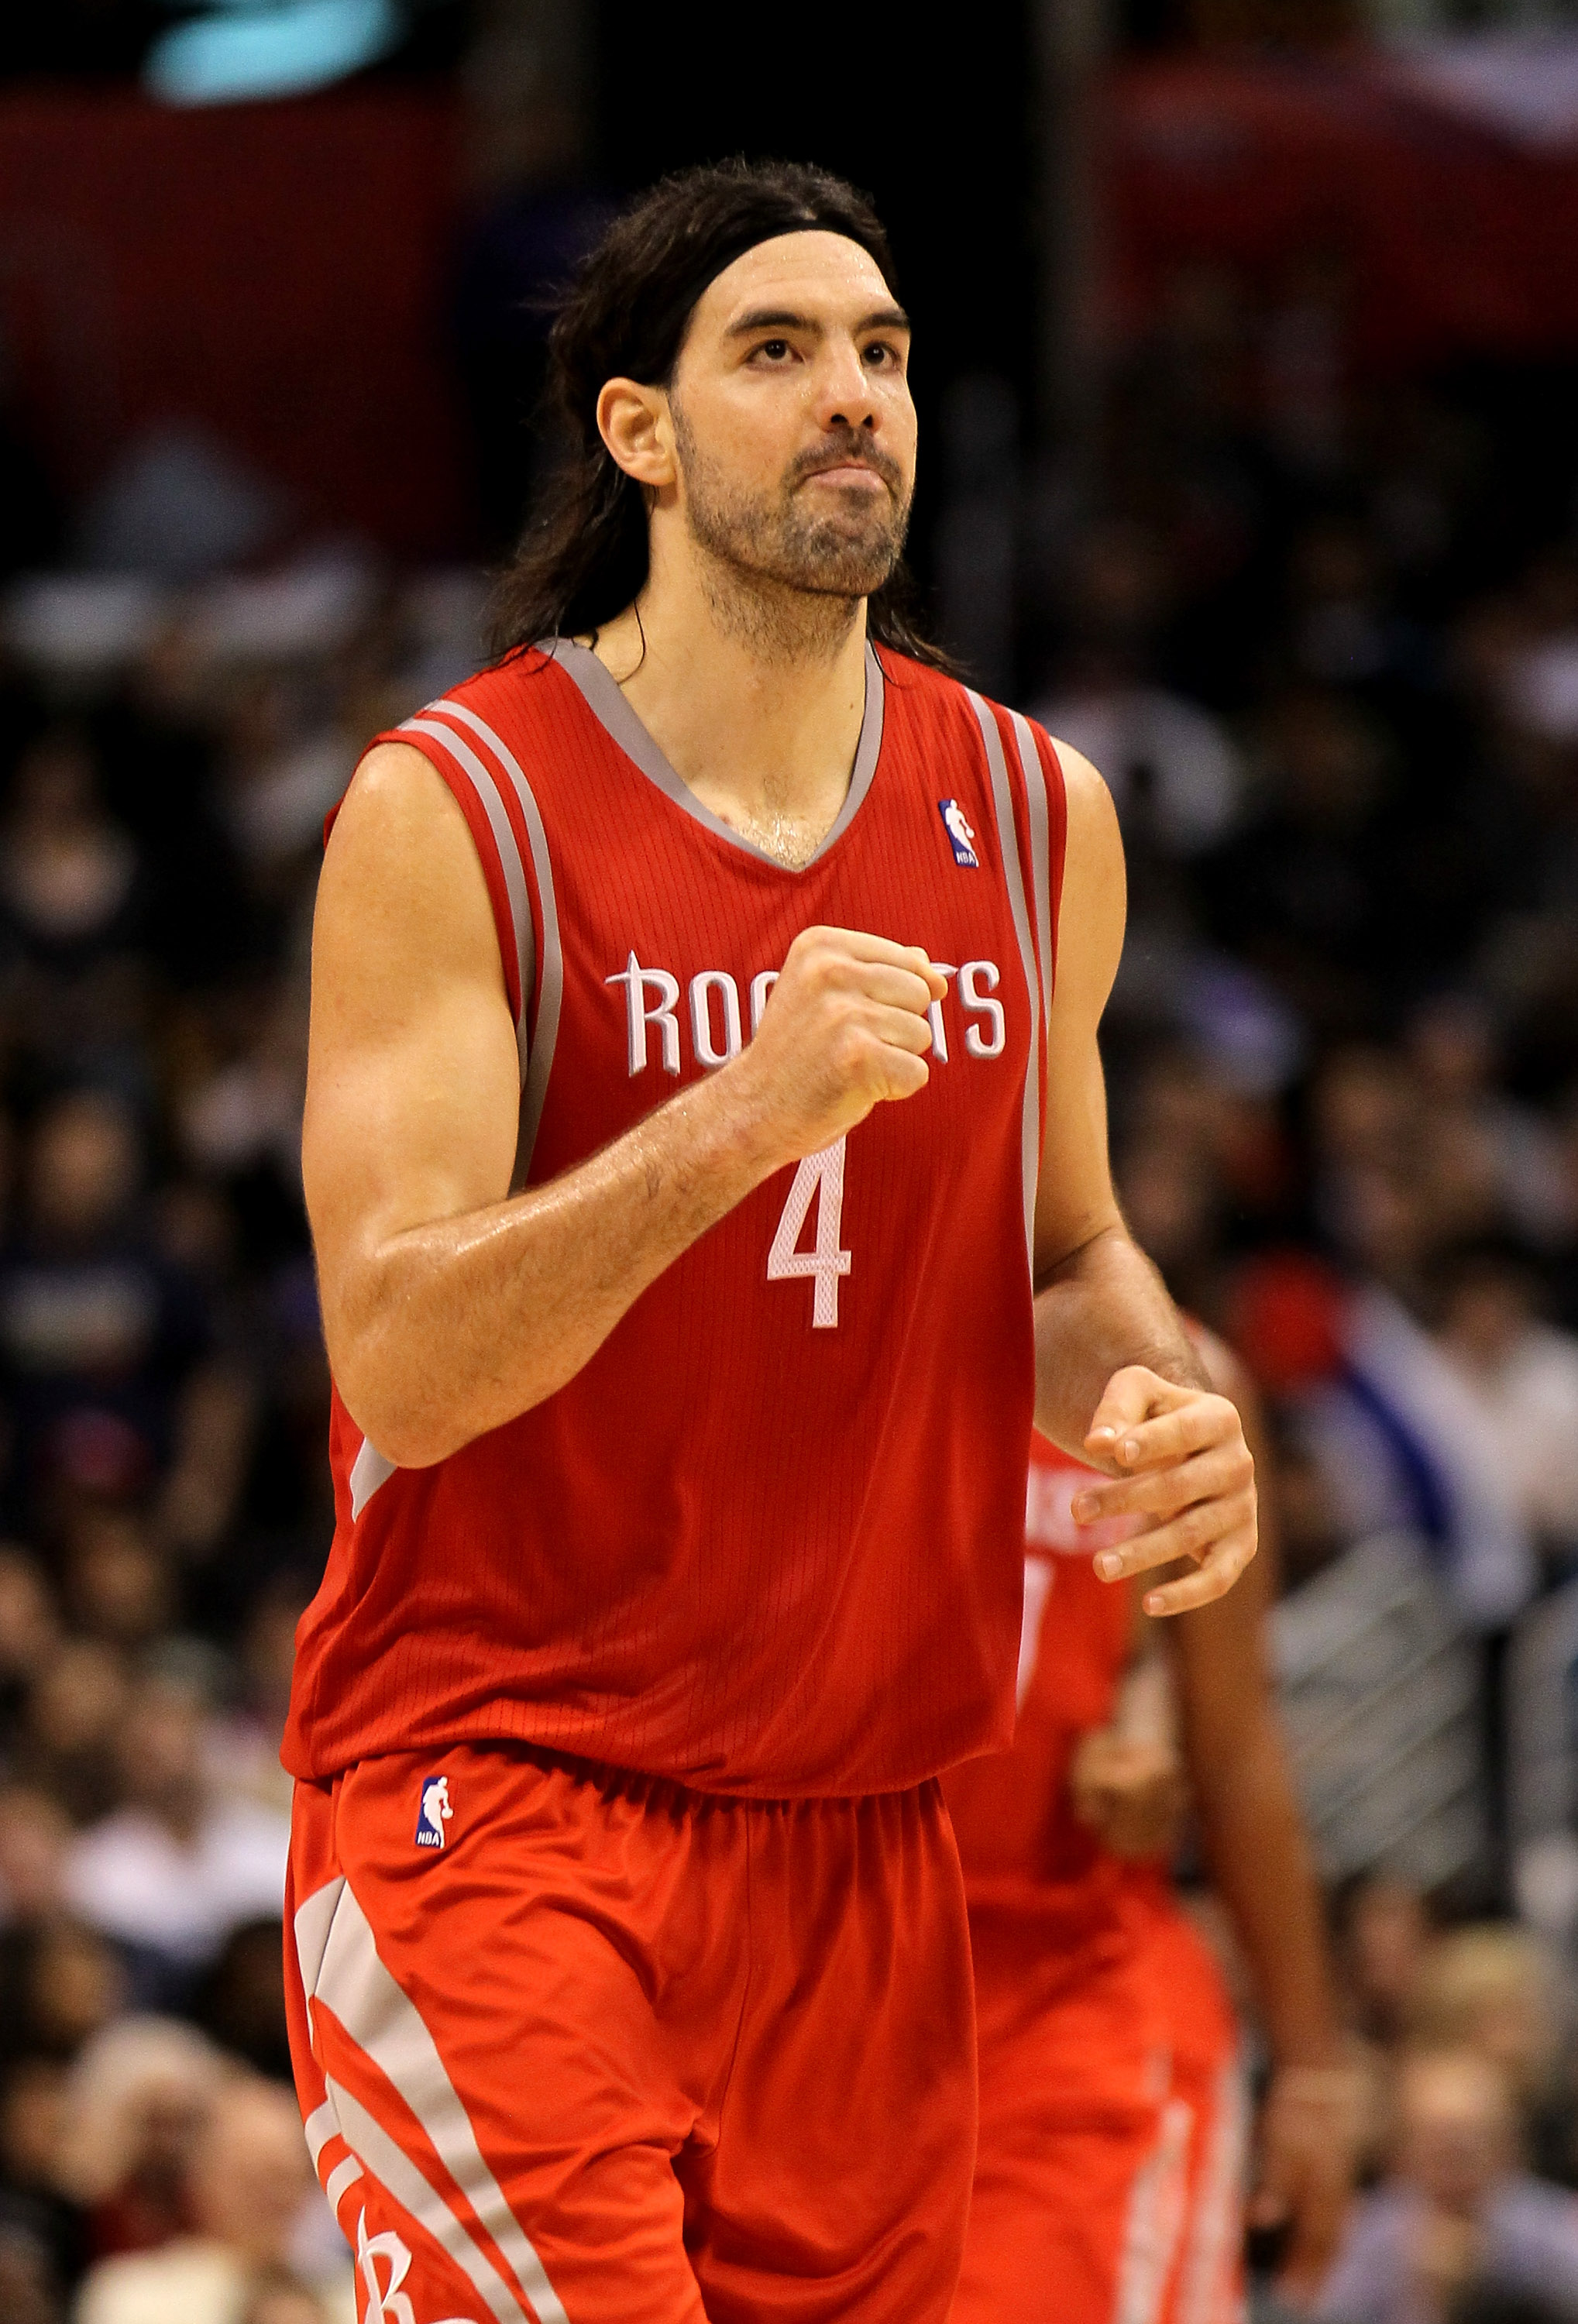 LOS ANGELES, CA - DECEMBER 22: Luis Scola #4 of the Houston Rockets celebrates after making a basket late in the fourth quarter against the Los Angeles Clippers at Staples Center on December 22, 2010 in Los Angeles, California.  The Rockets won 97-92. NOT